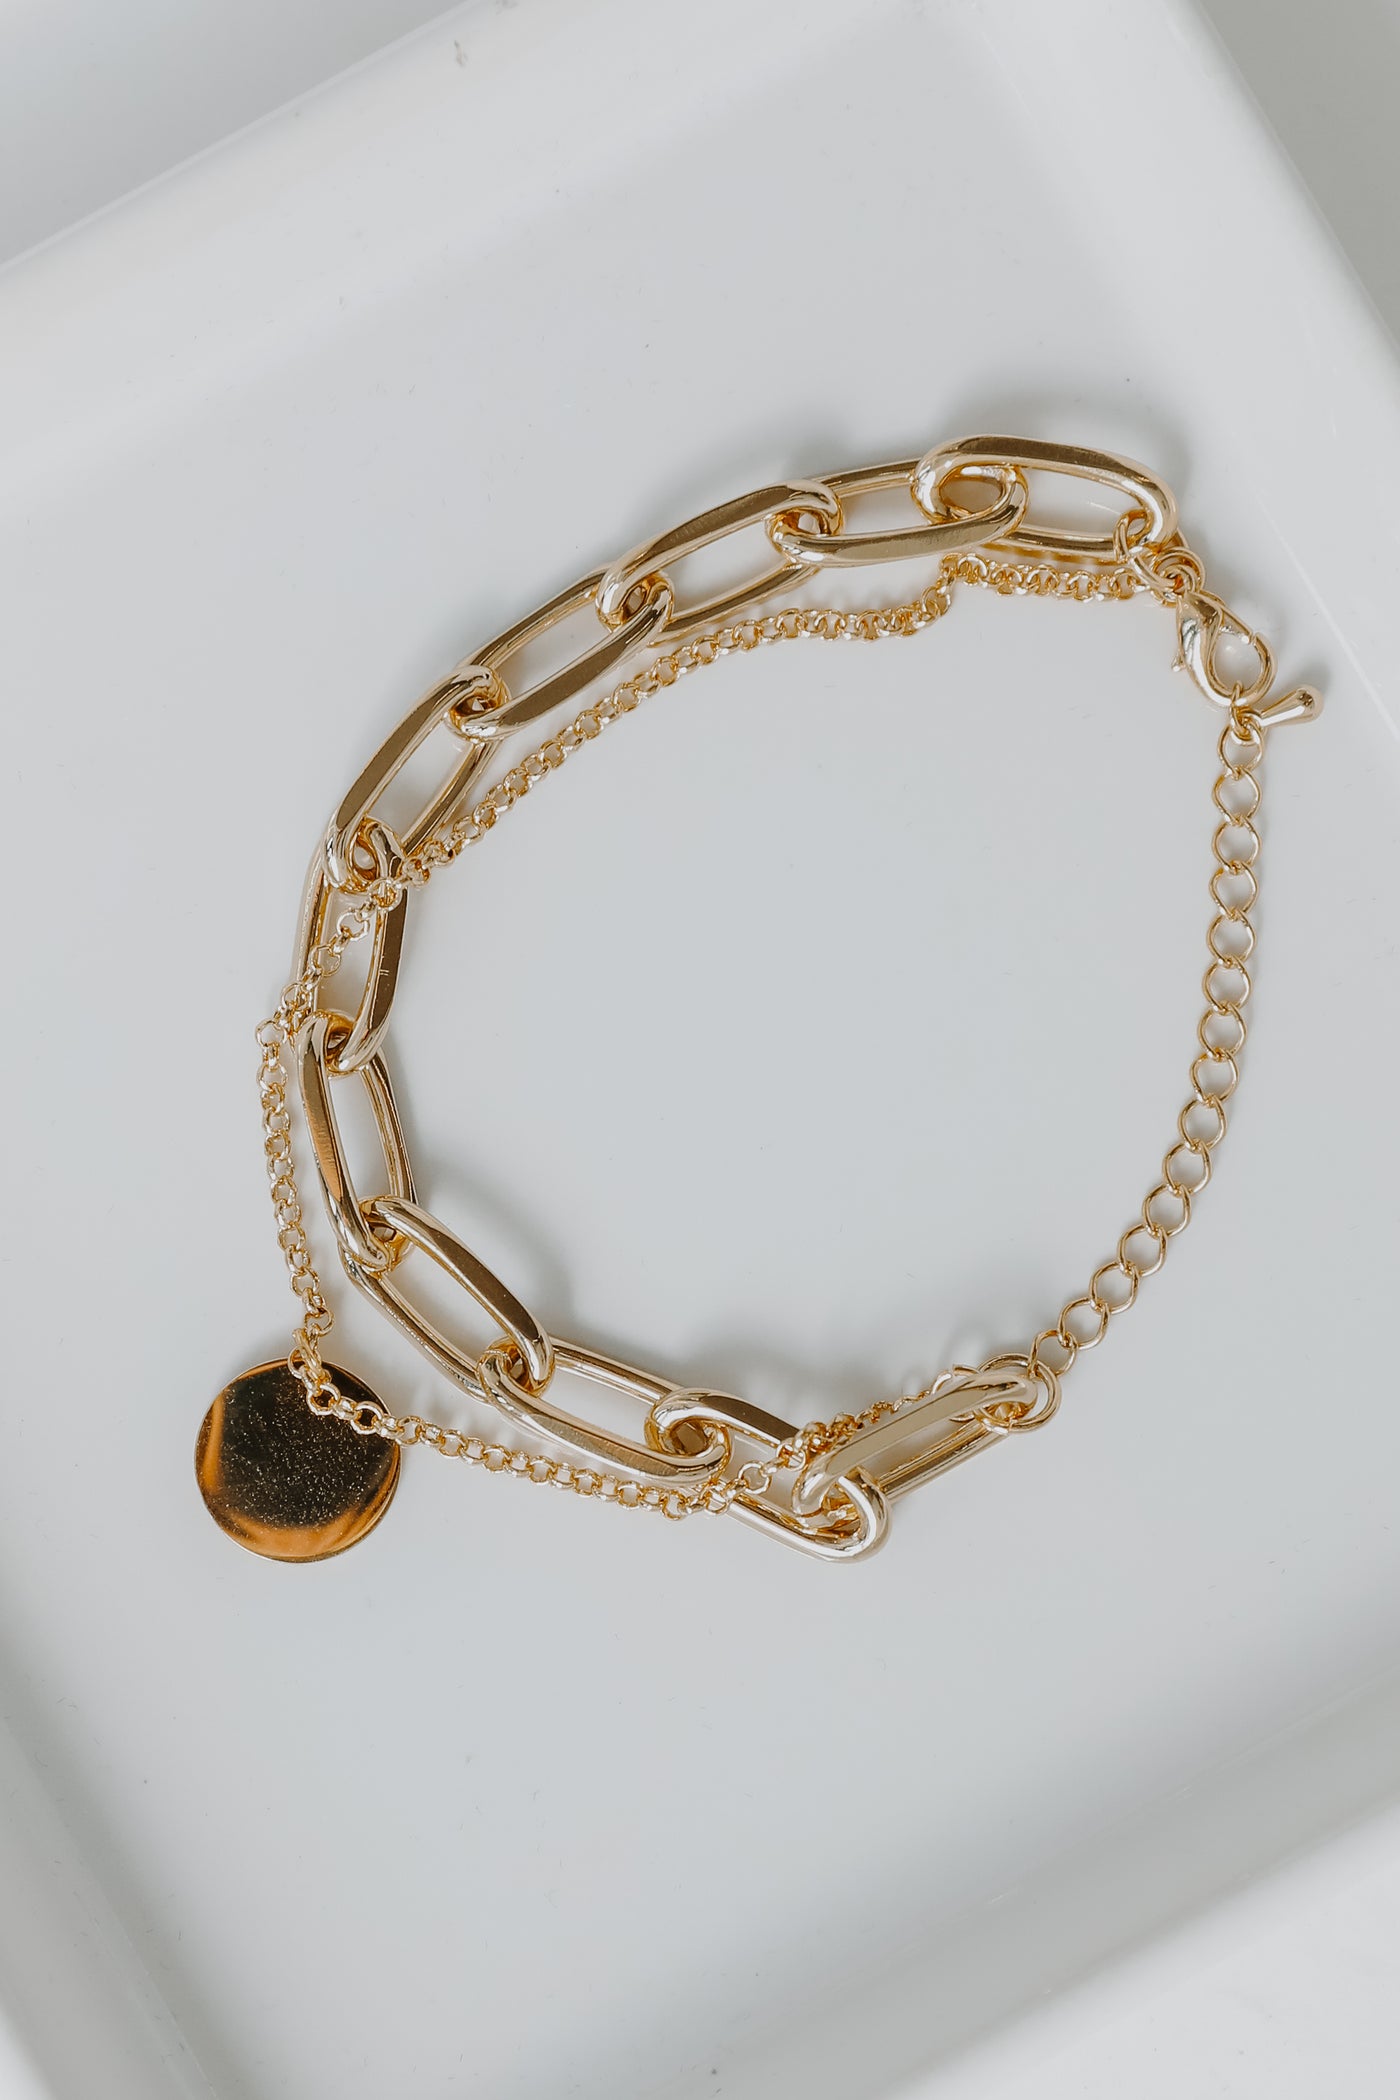 Gold Layered Chain Bracelet from dress up